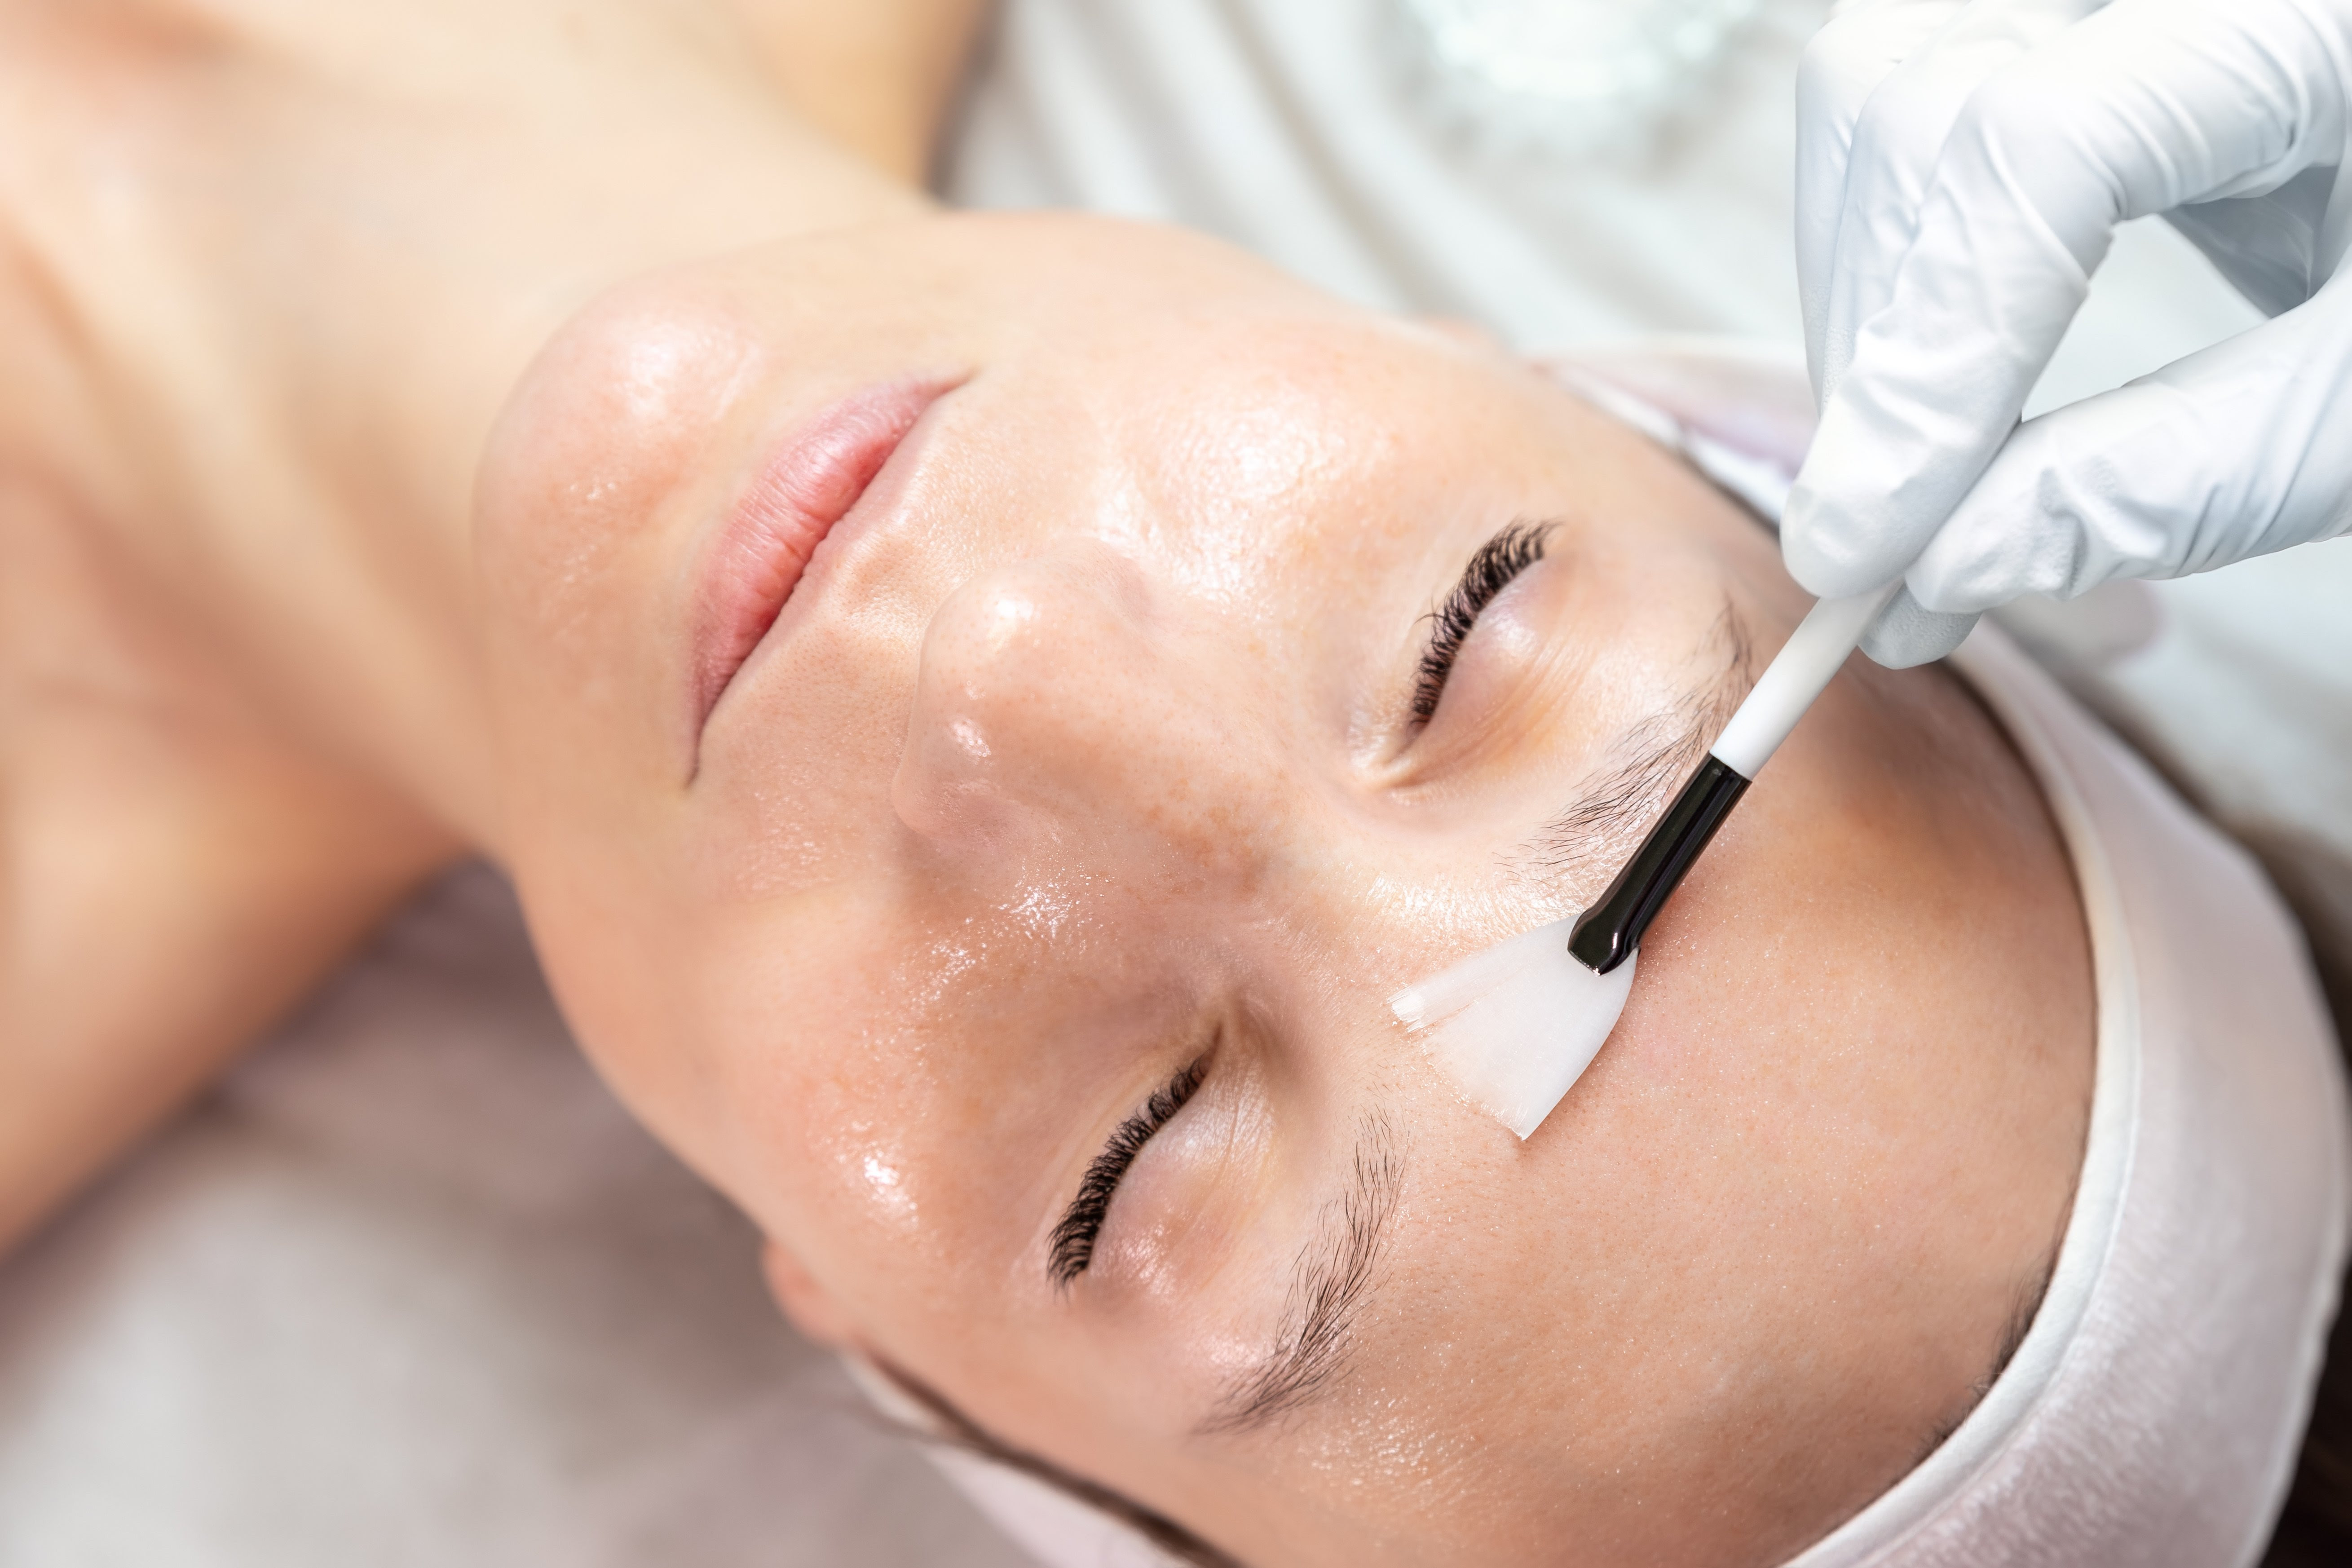 Woman receives a chemical peel treatment on her face from an esthetician